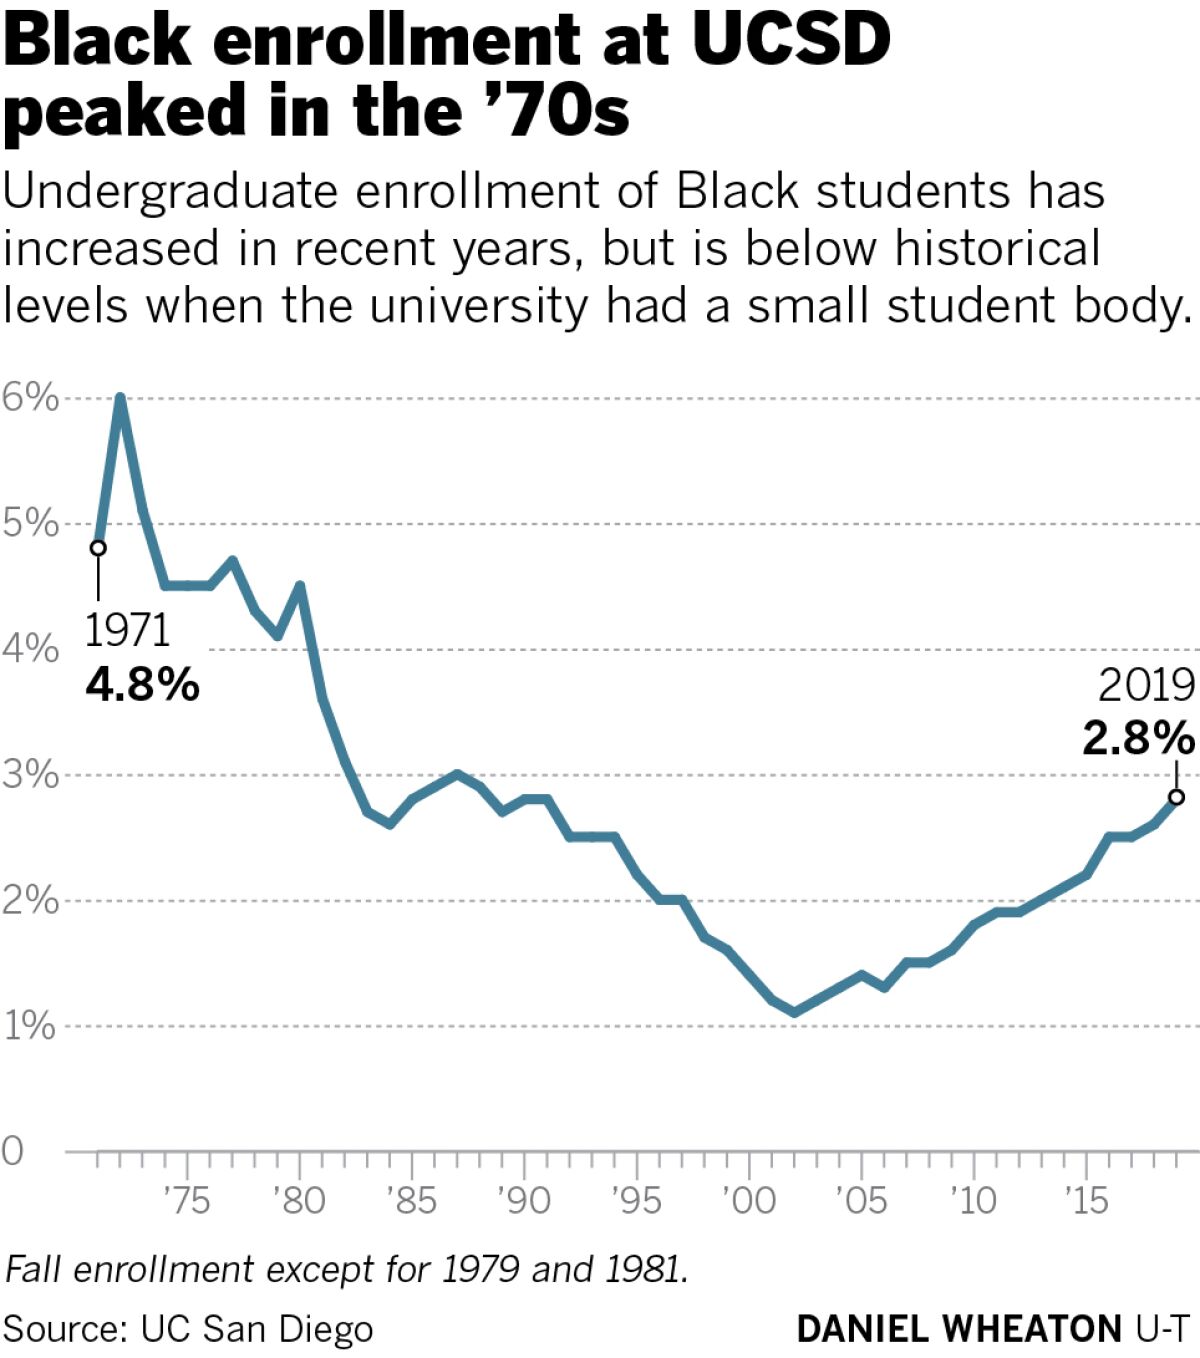 Black enrollment at UCSD peaked in the 1970s.